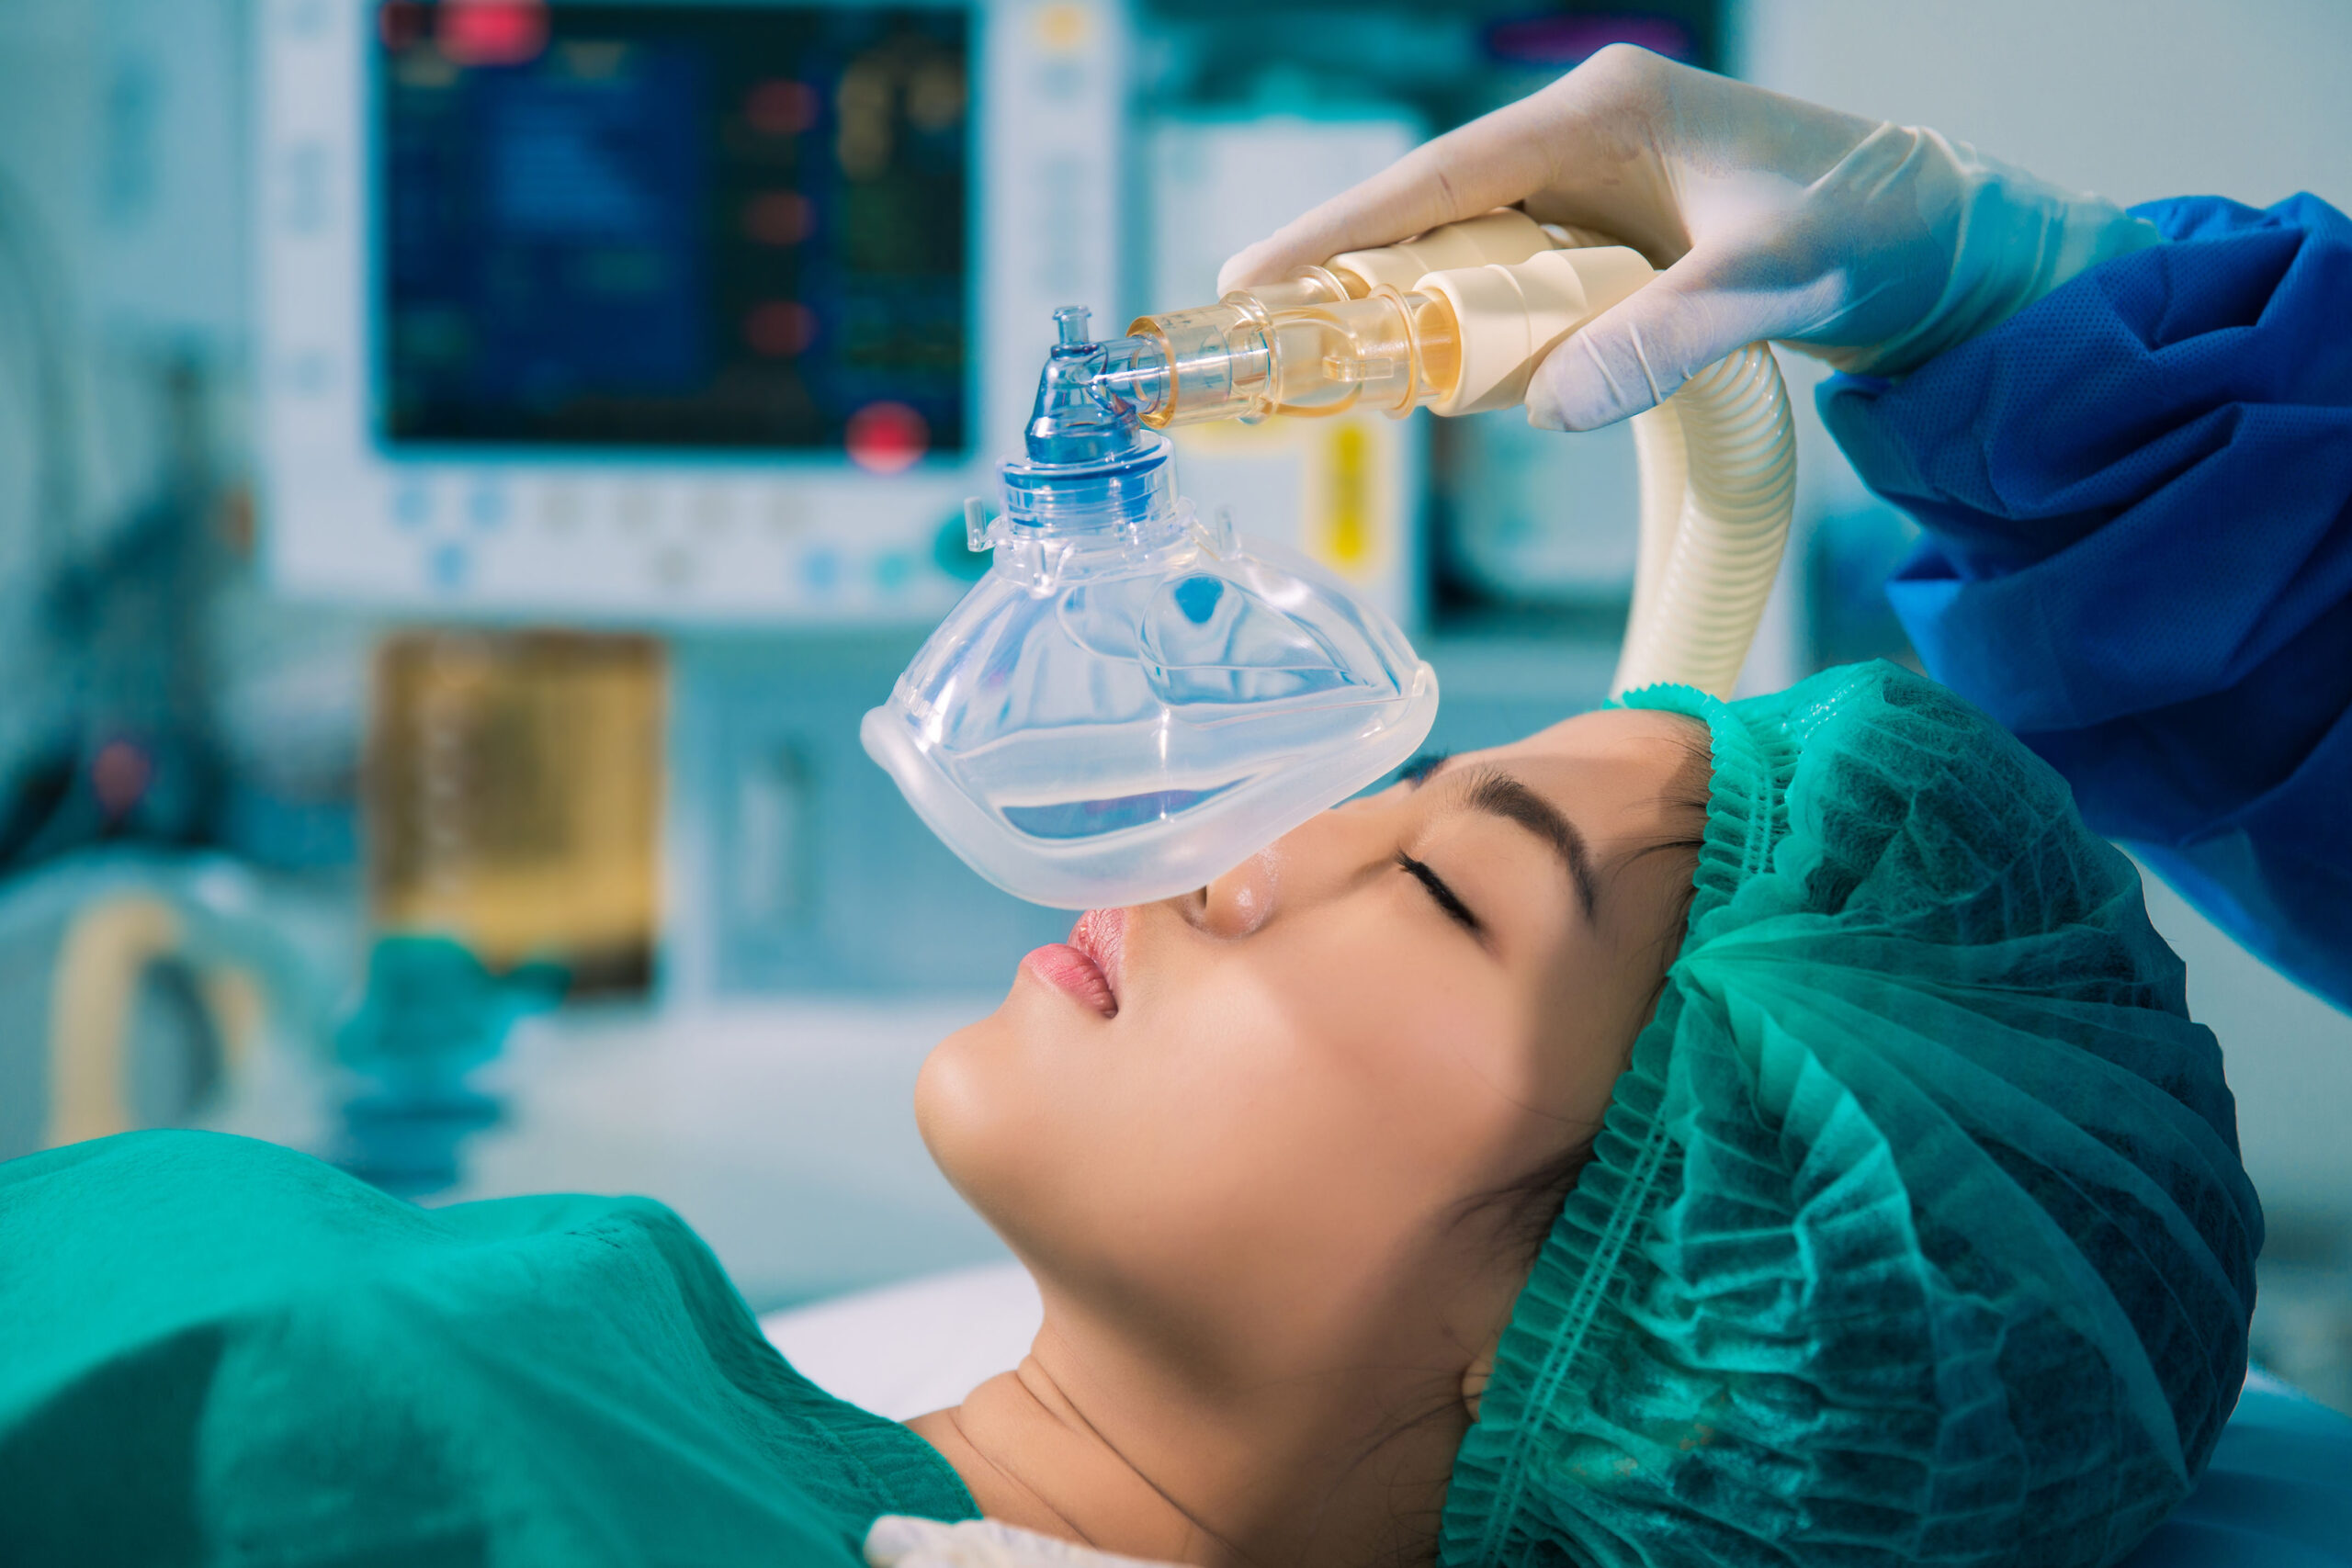 Provide Office-Based Anesthesia Using an Anesthesiologist Private Practice